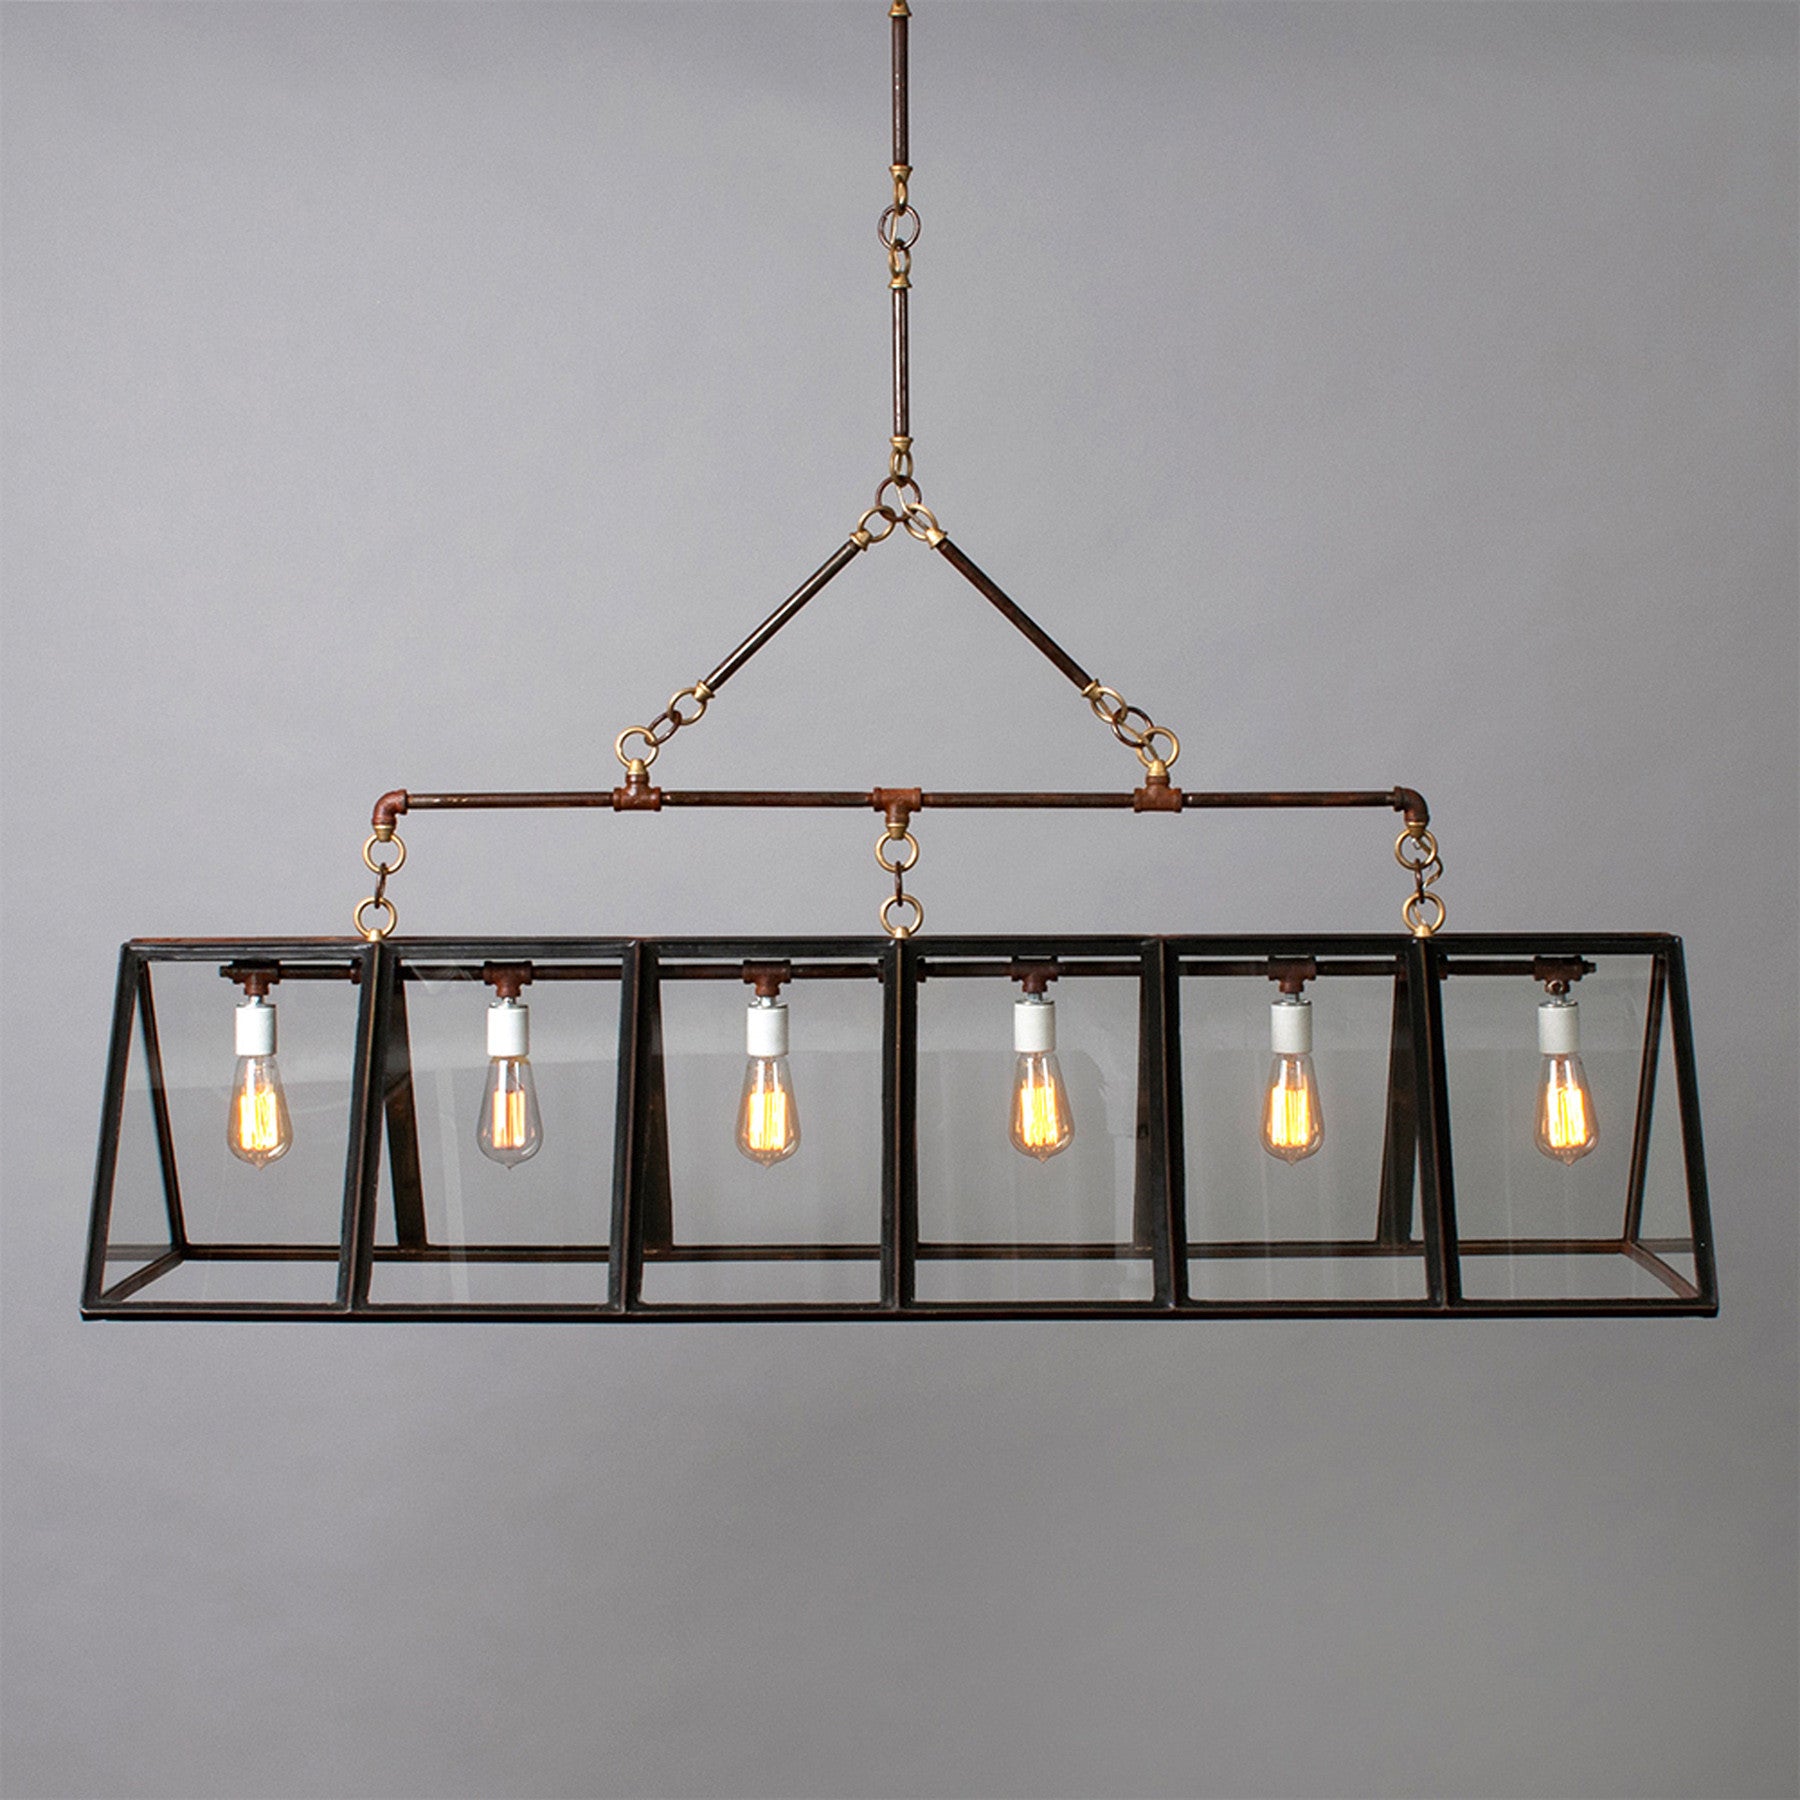 An industrial-style chandelier with five exposed vintage Edison bulbs by Hester &amp; Cook&